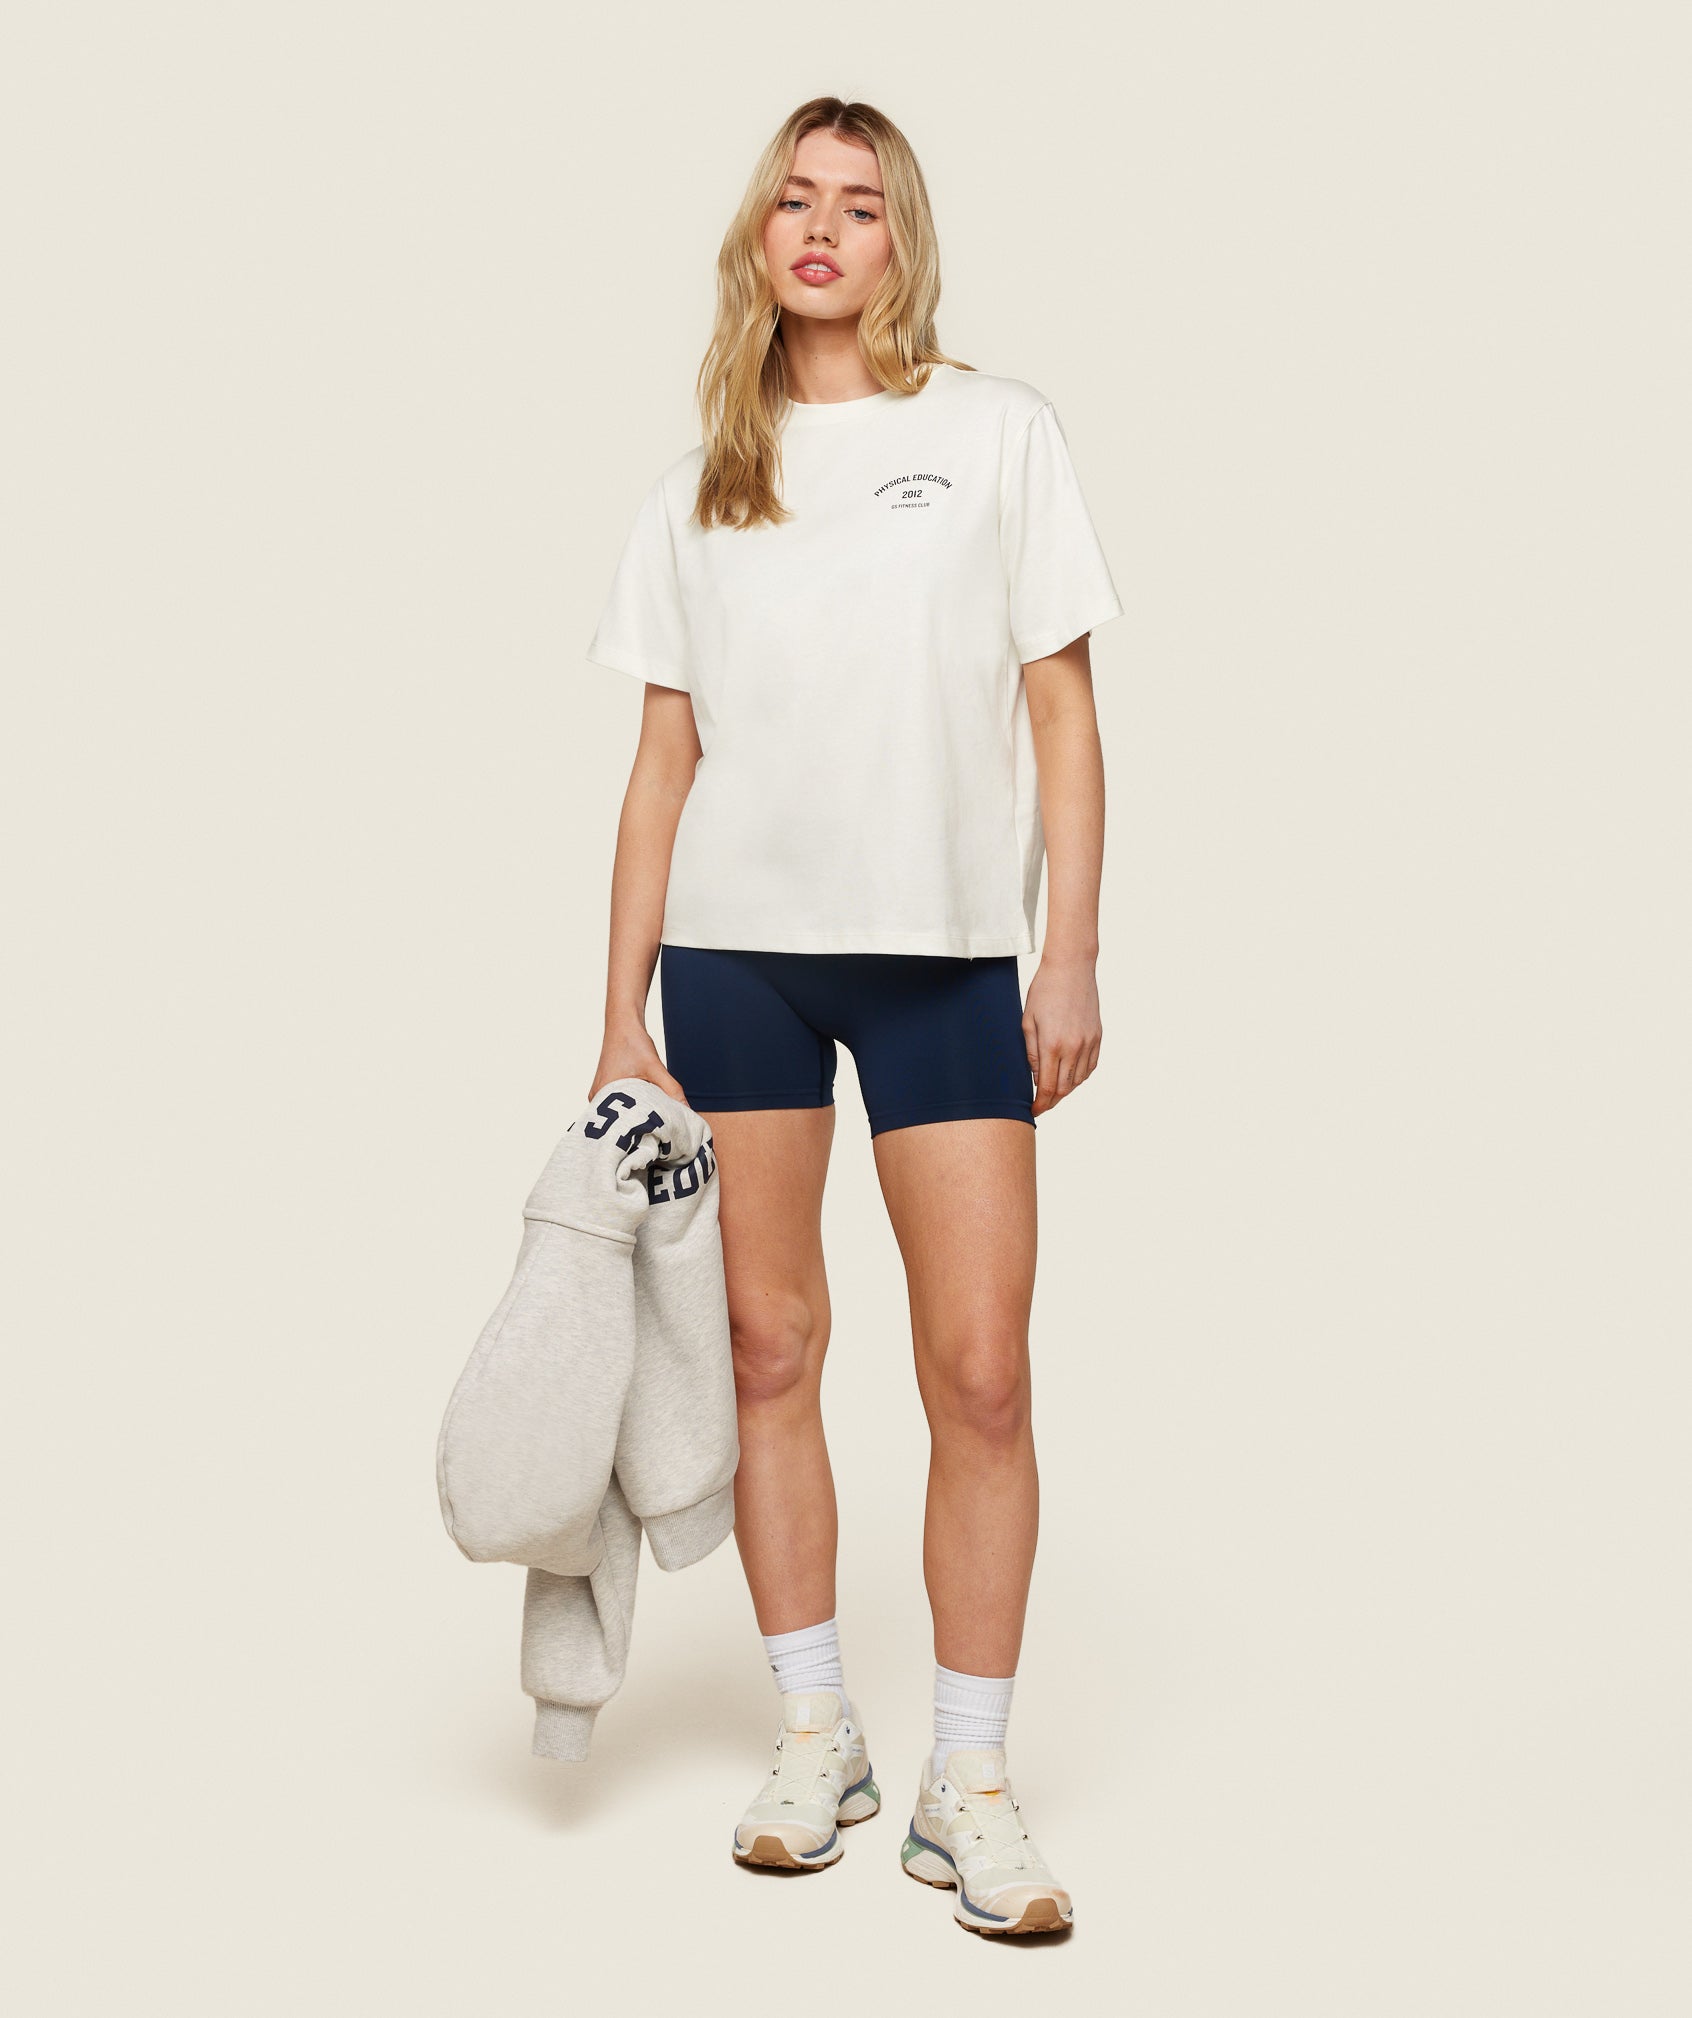 Phys Ed Graphic T-Shirt in Soft White - view 3